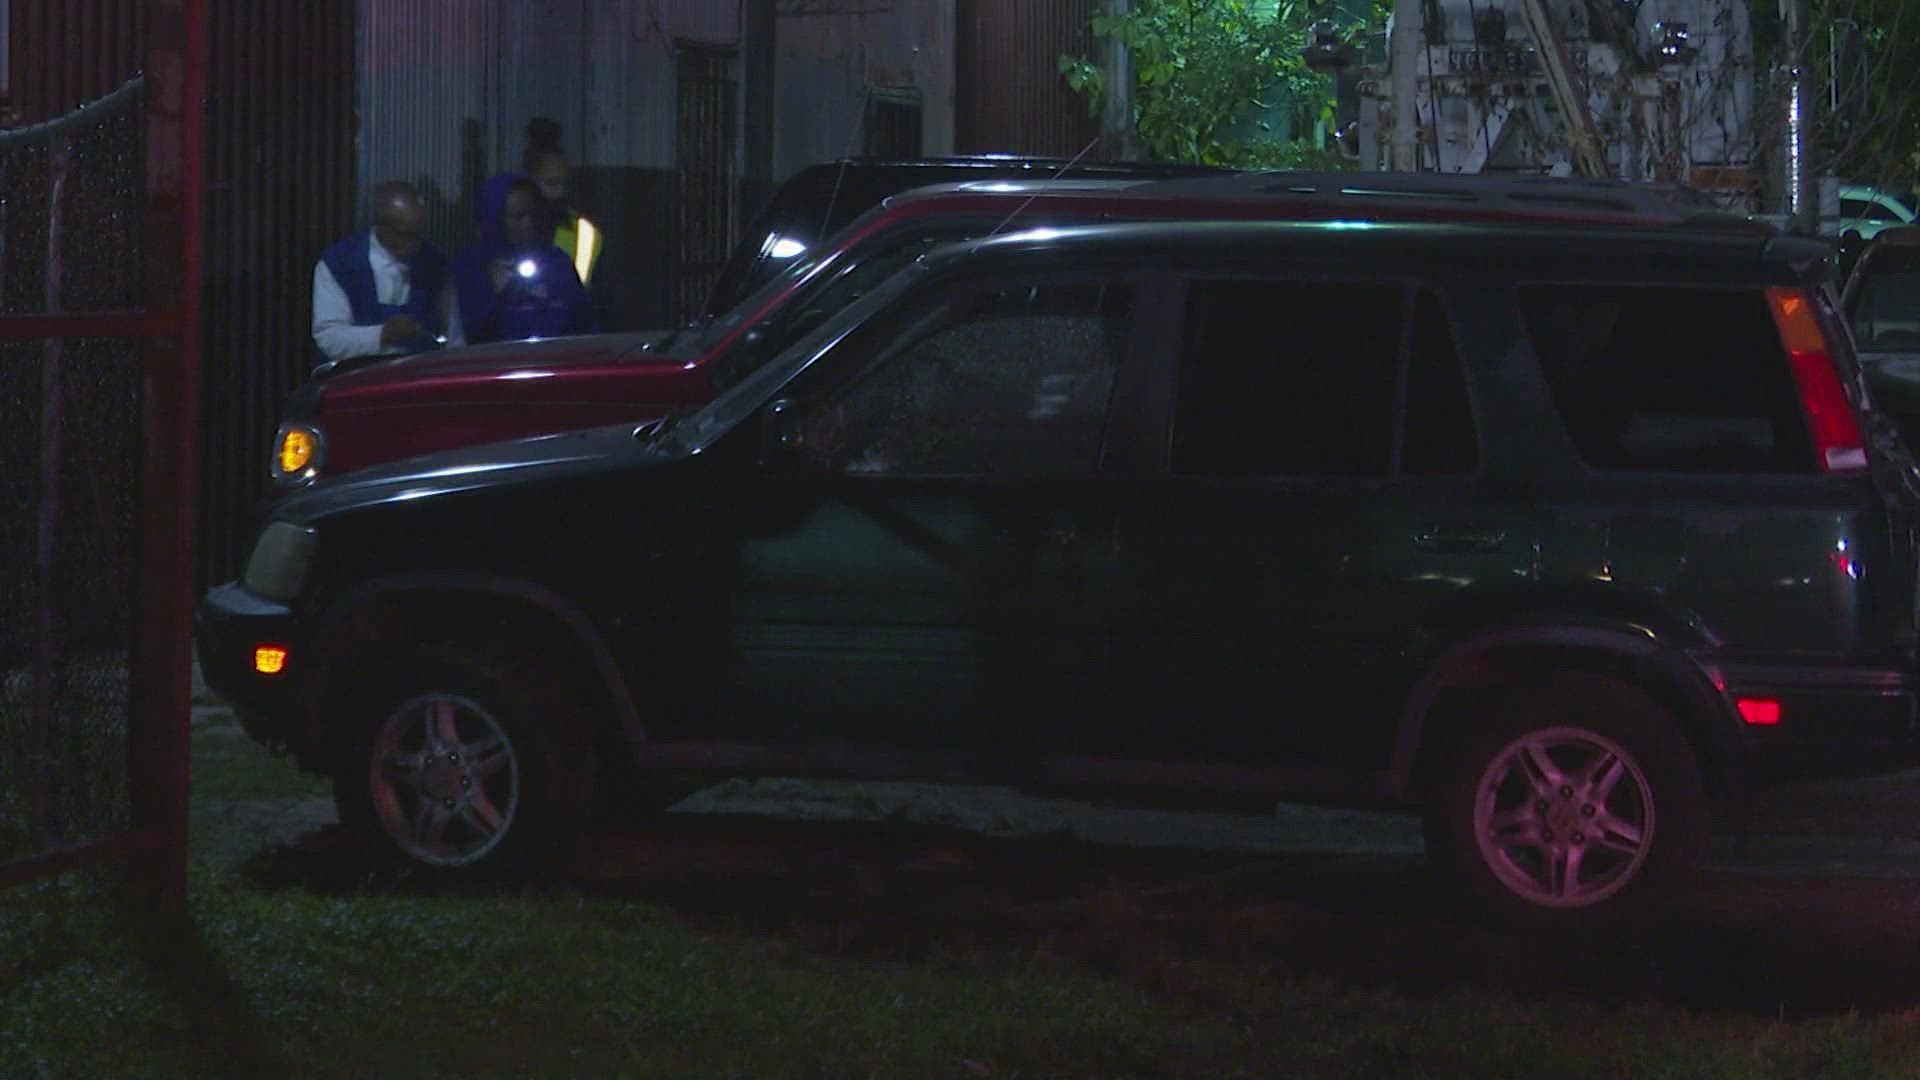 A man was shot in the stomach in a suspected road rage shooting in Houston's southside Tuesday night, police said.